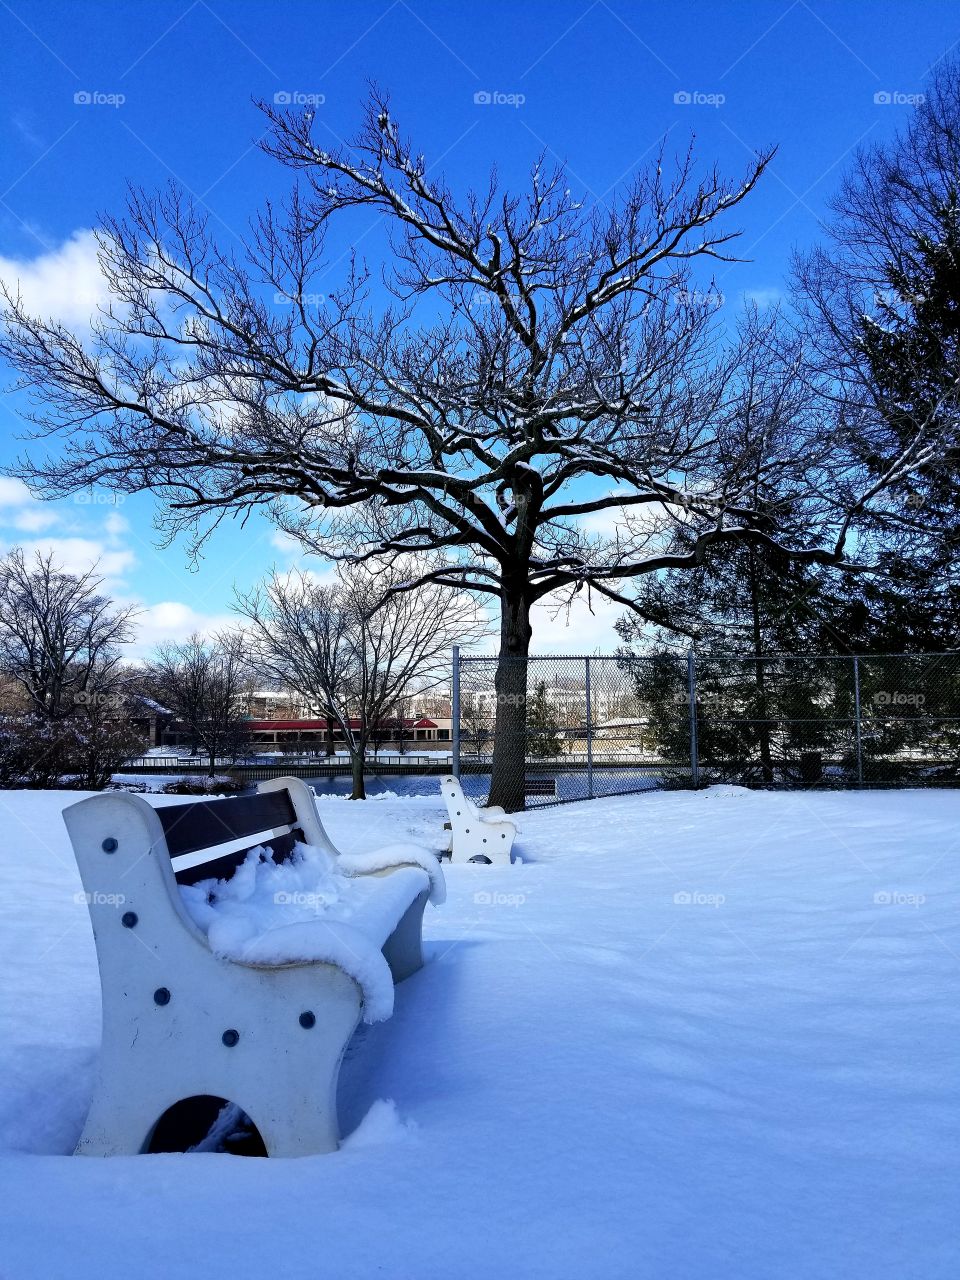 Snow storm in March. This was the day after. Nice and sunny to walk in the park. Benches are still covered with snow.